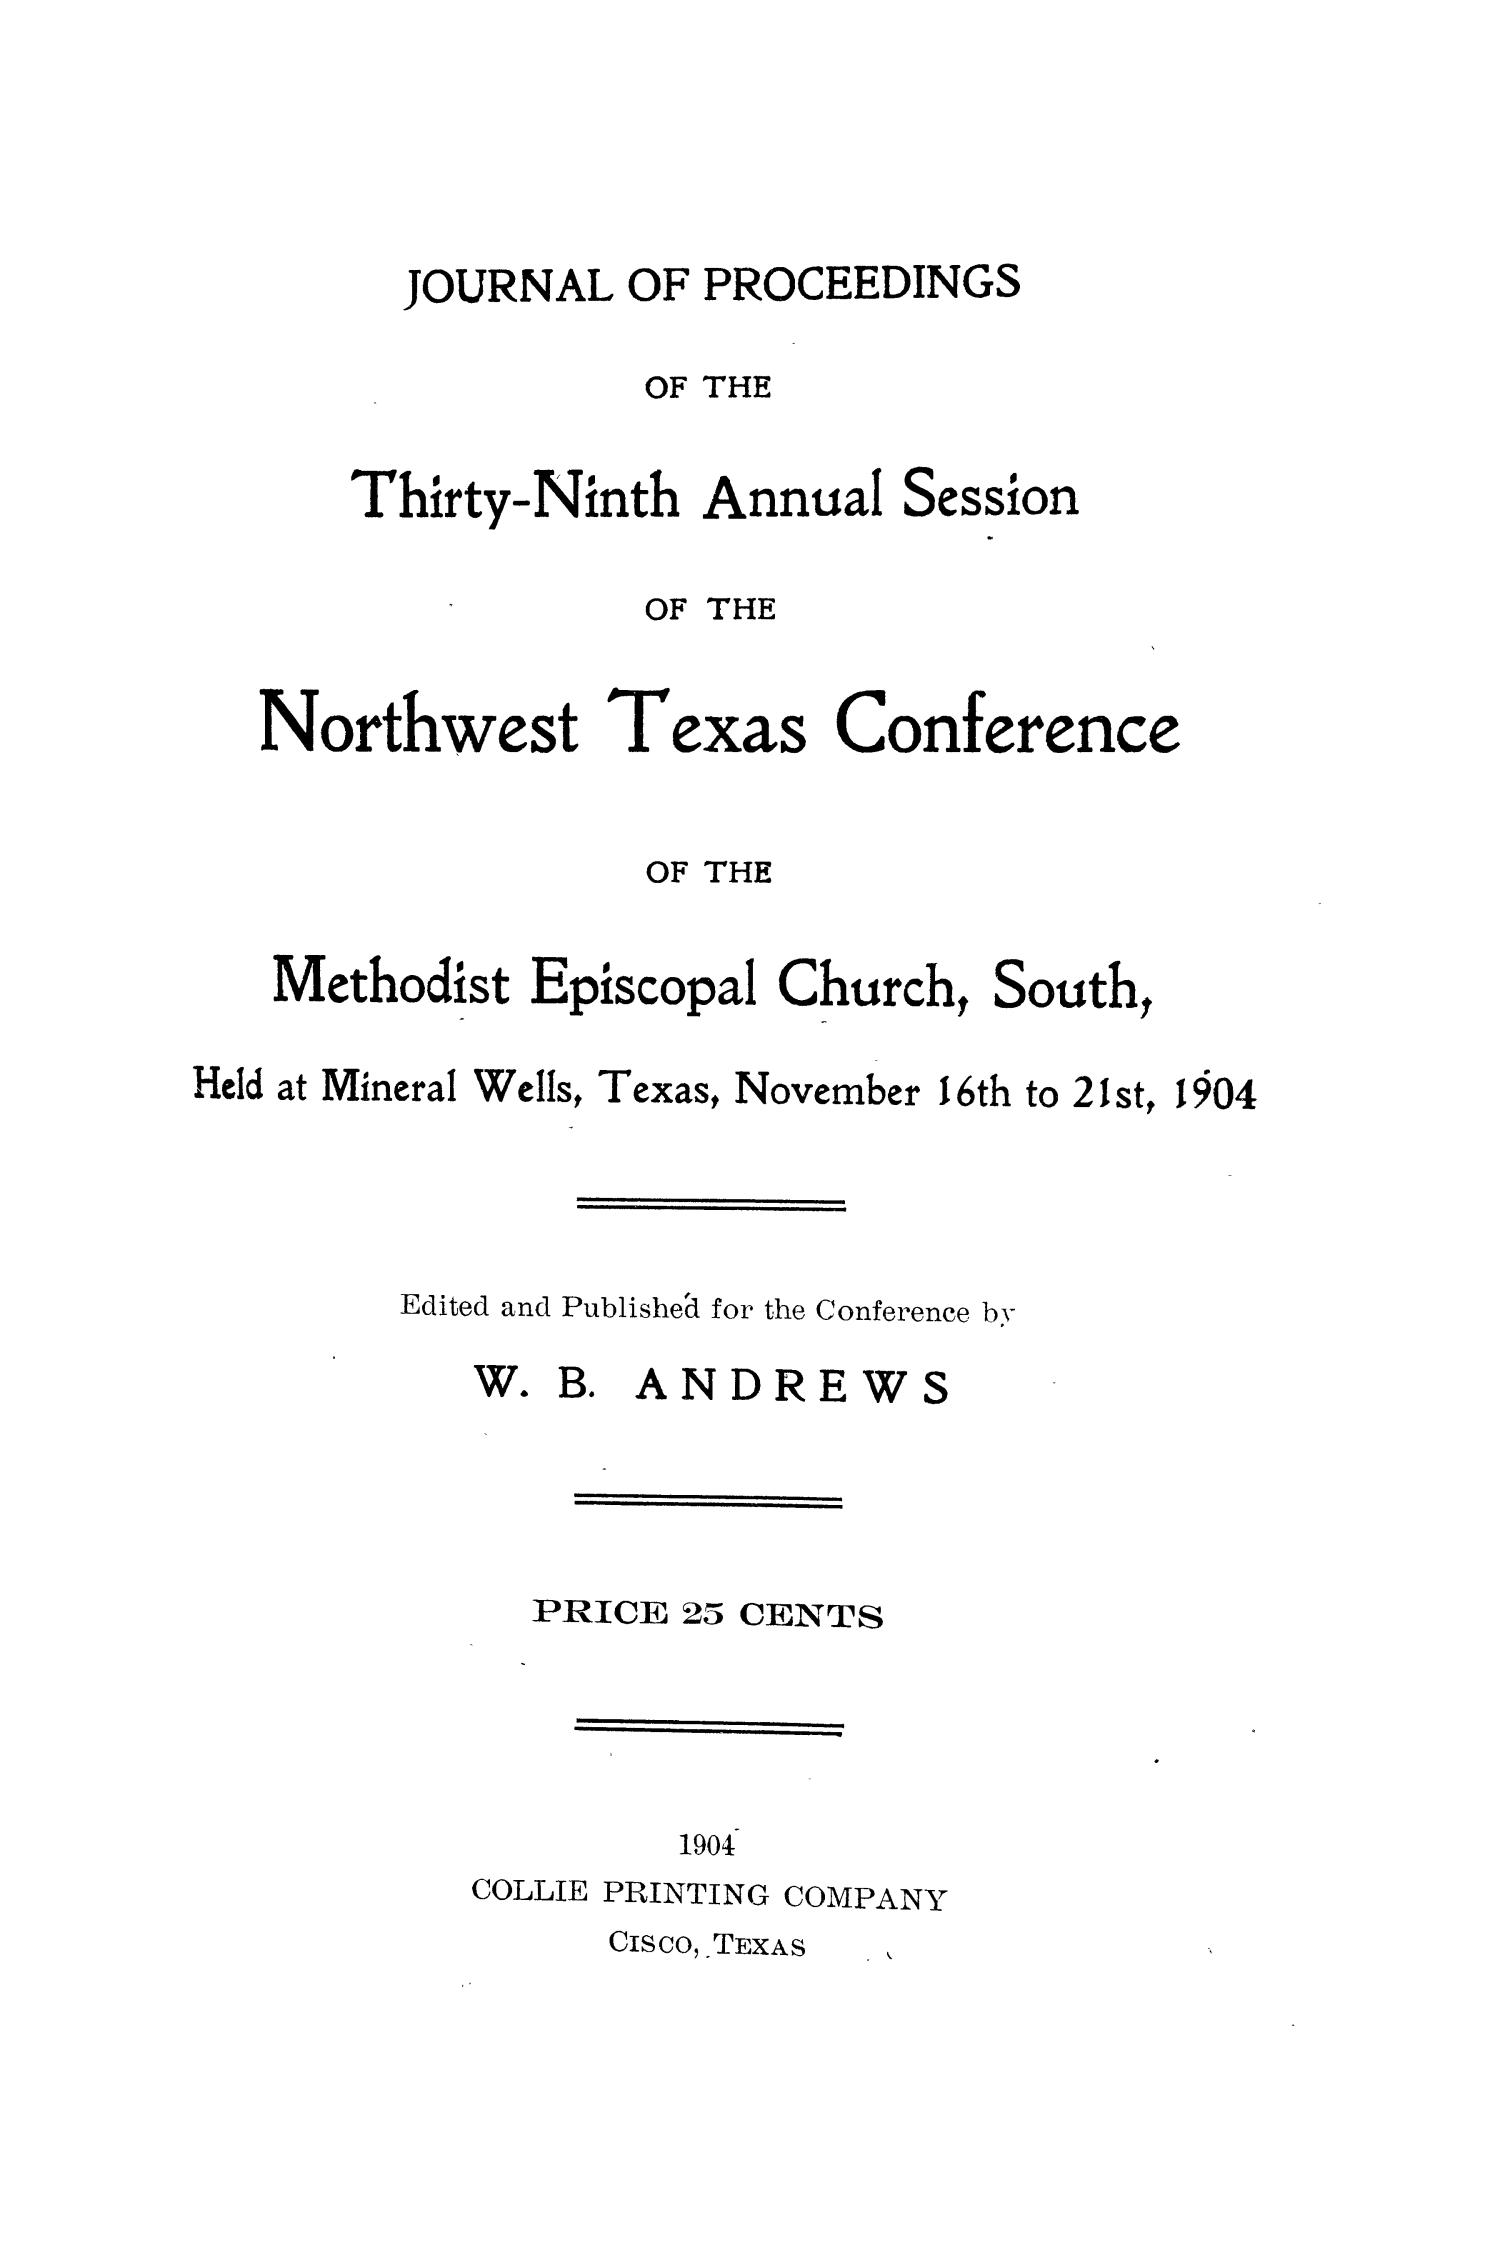 Journal of Proceedings of the Thirty-Ninth Annual Session of The Northwest Texas Conference, of the Methodist Episcopal Church, South, Held at Mineral Wells, Texas, November 16th to November 21st, 1904
                                                
                                                    1
                                                